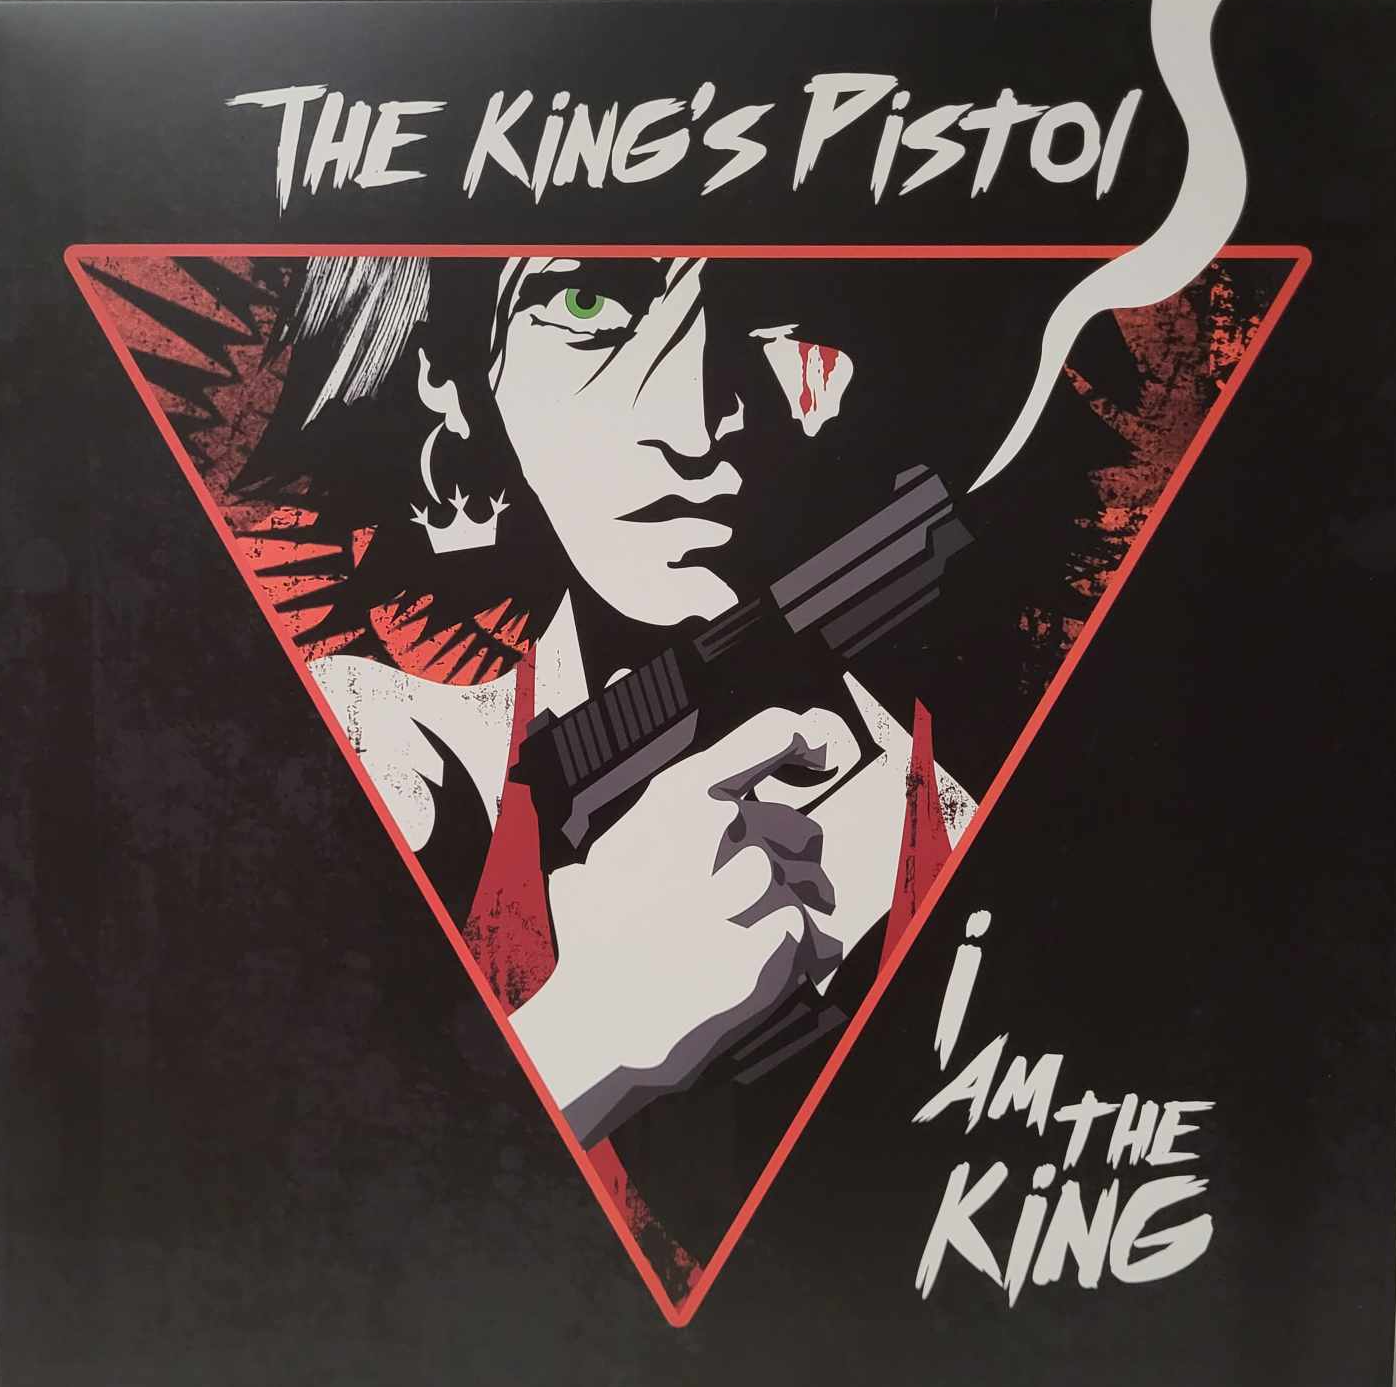 THE KING'S PISTOL - I AM THE KING